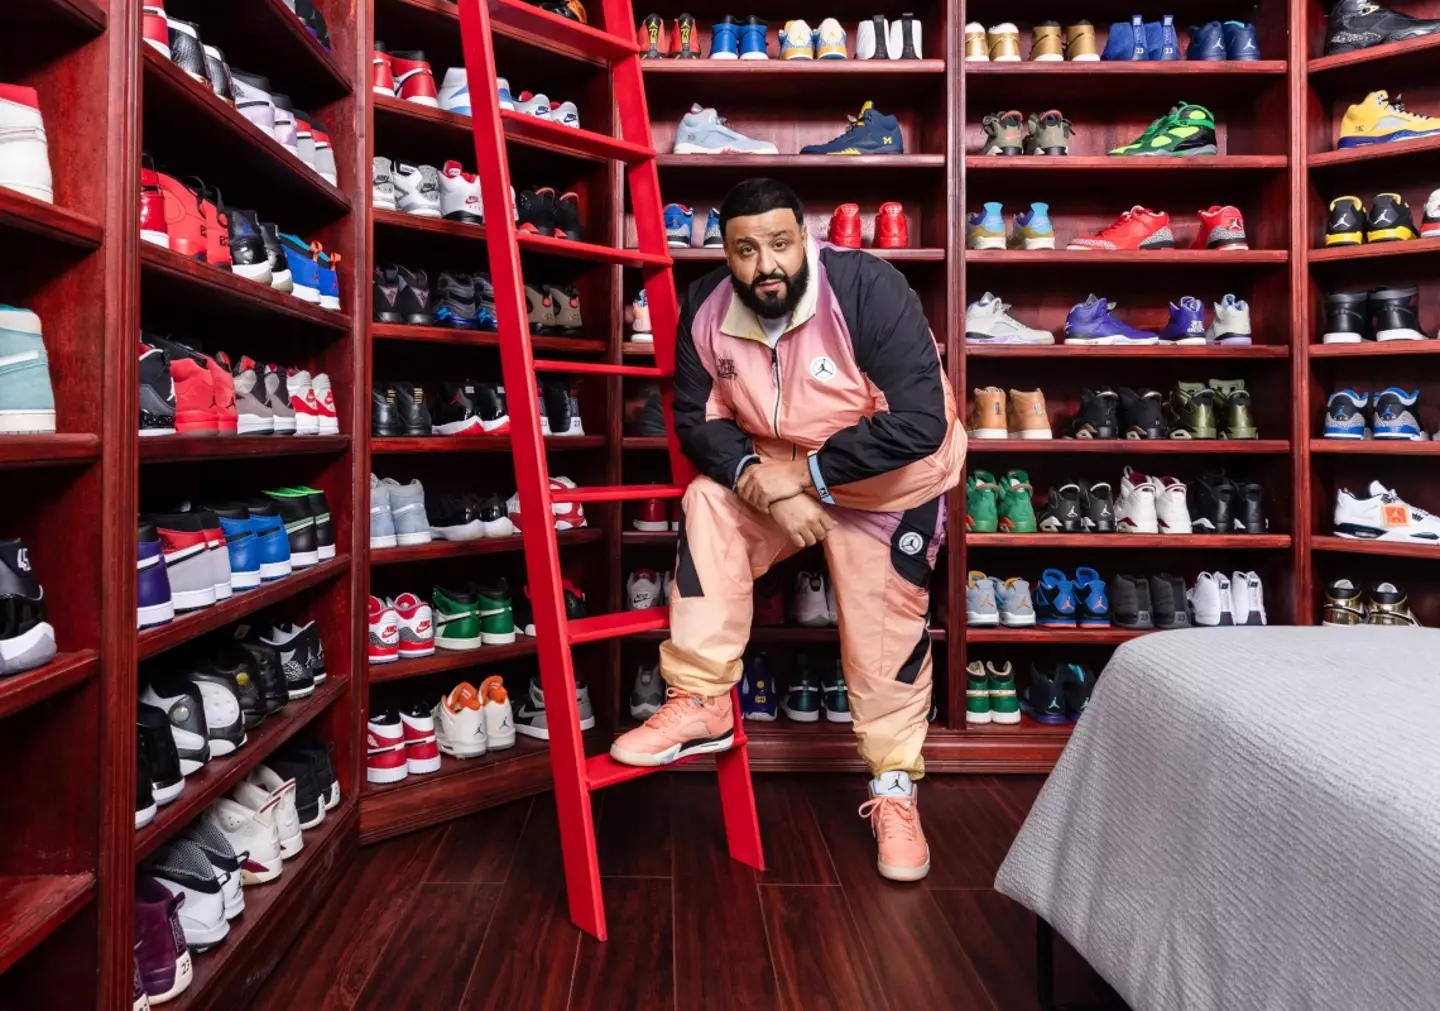 Shoes from DJ Khaled's personal collection line the walls.